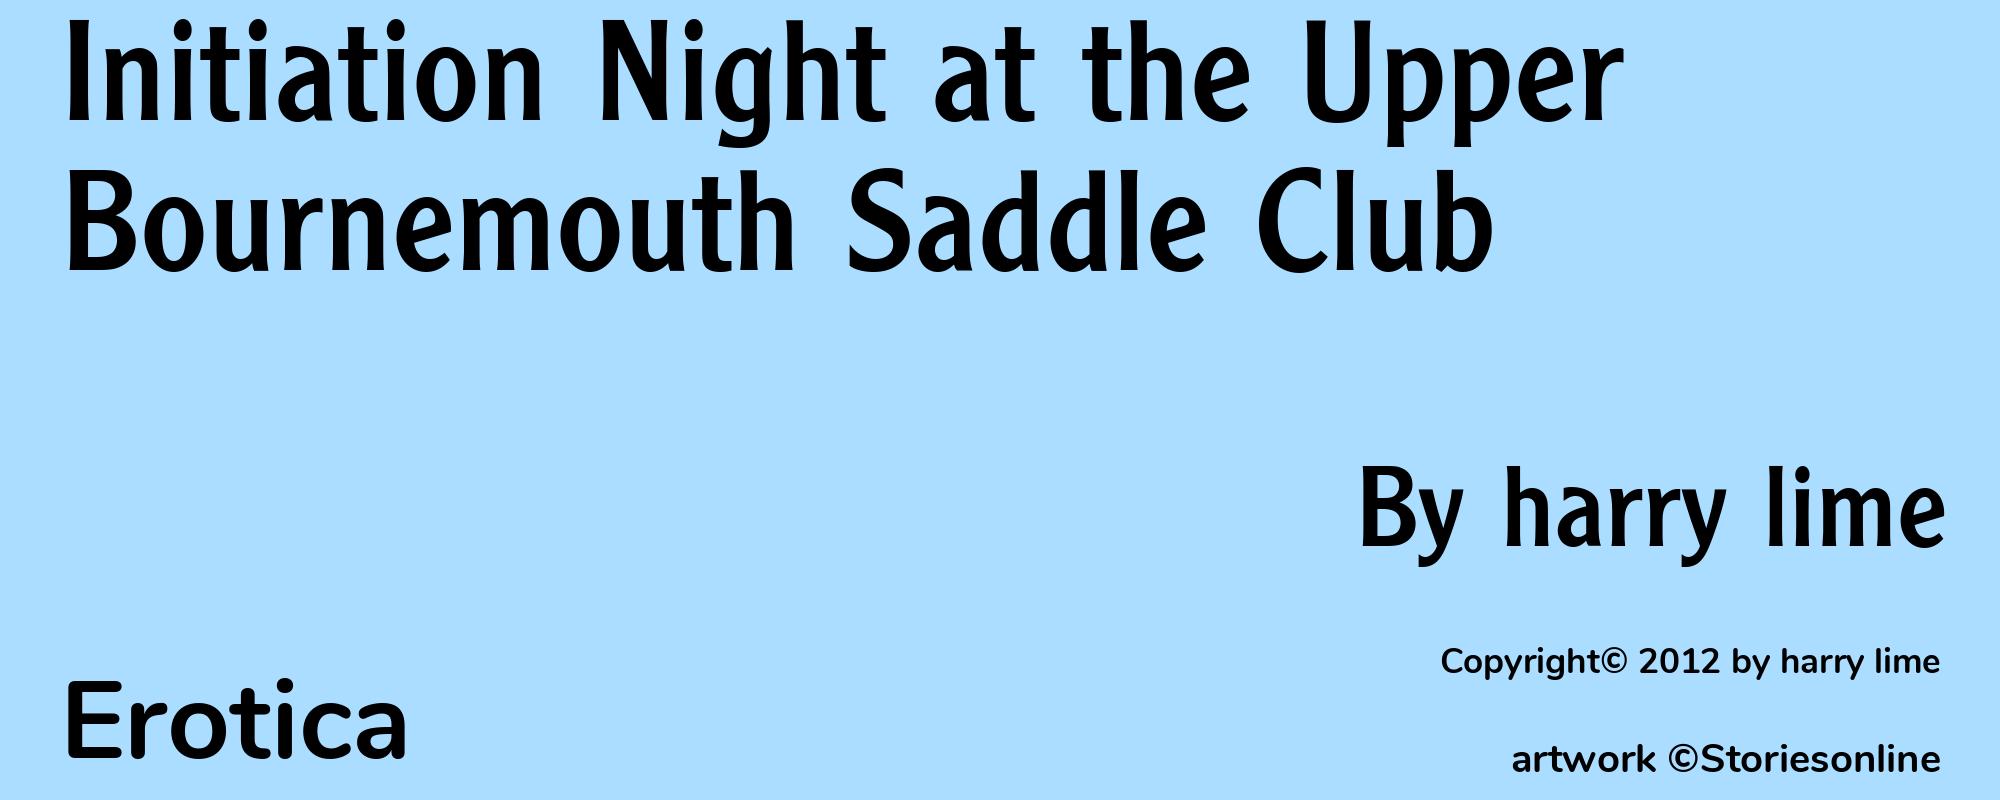 Initiation Night at the Upper Bournemouth Saddle Club - Cover